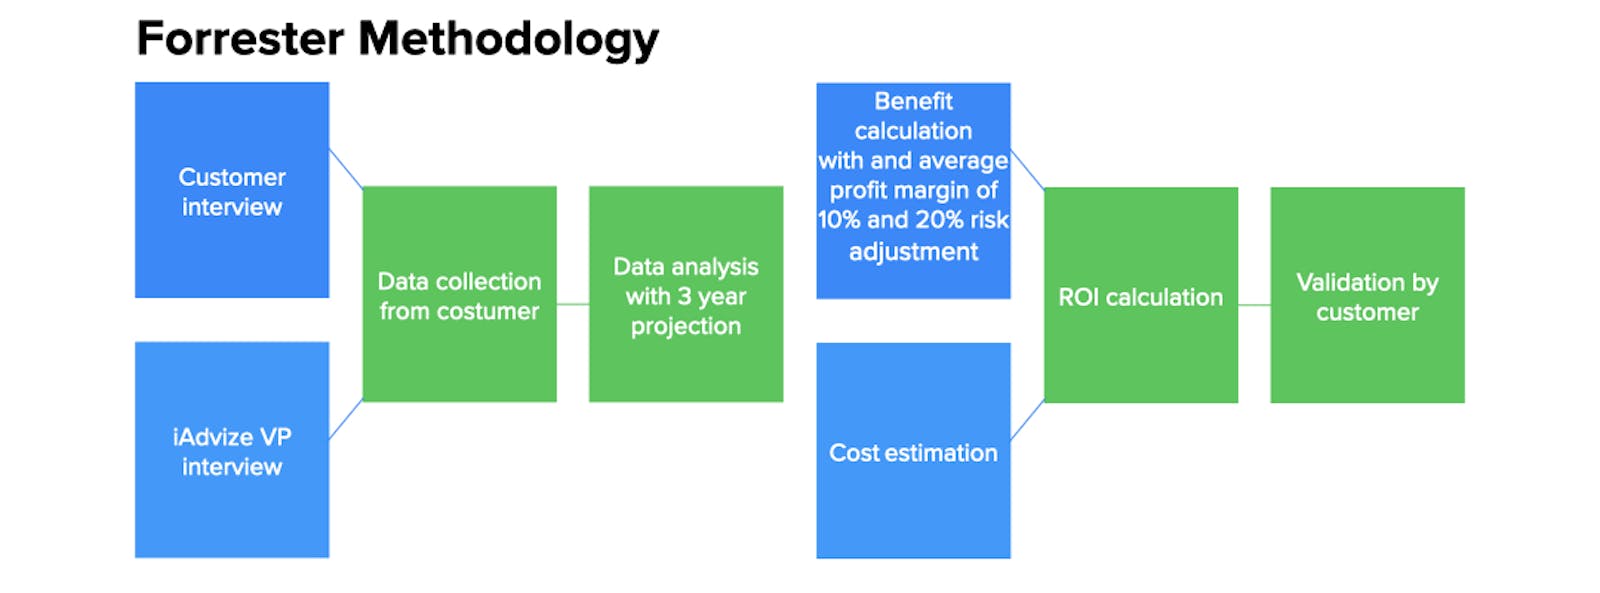 Messaging ROI Calculation